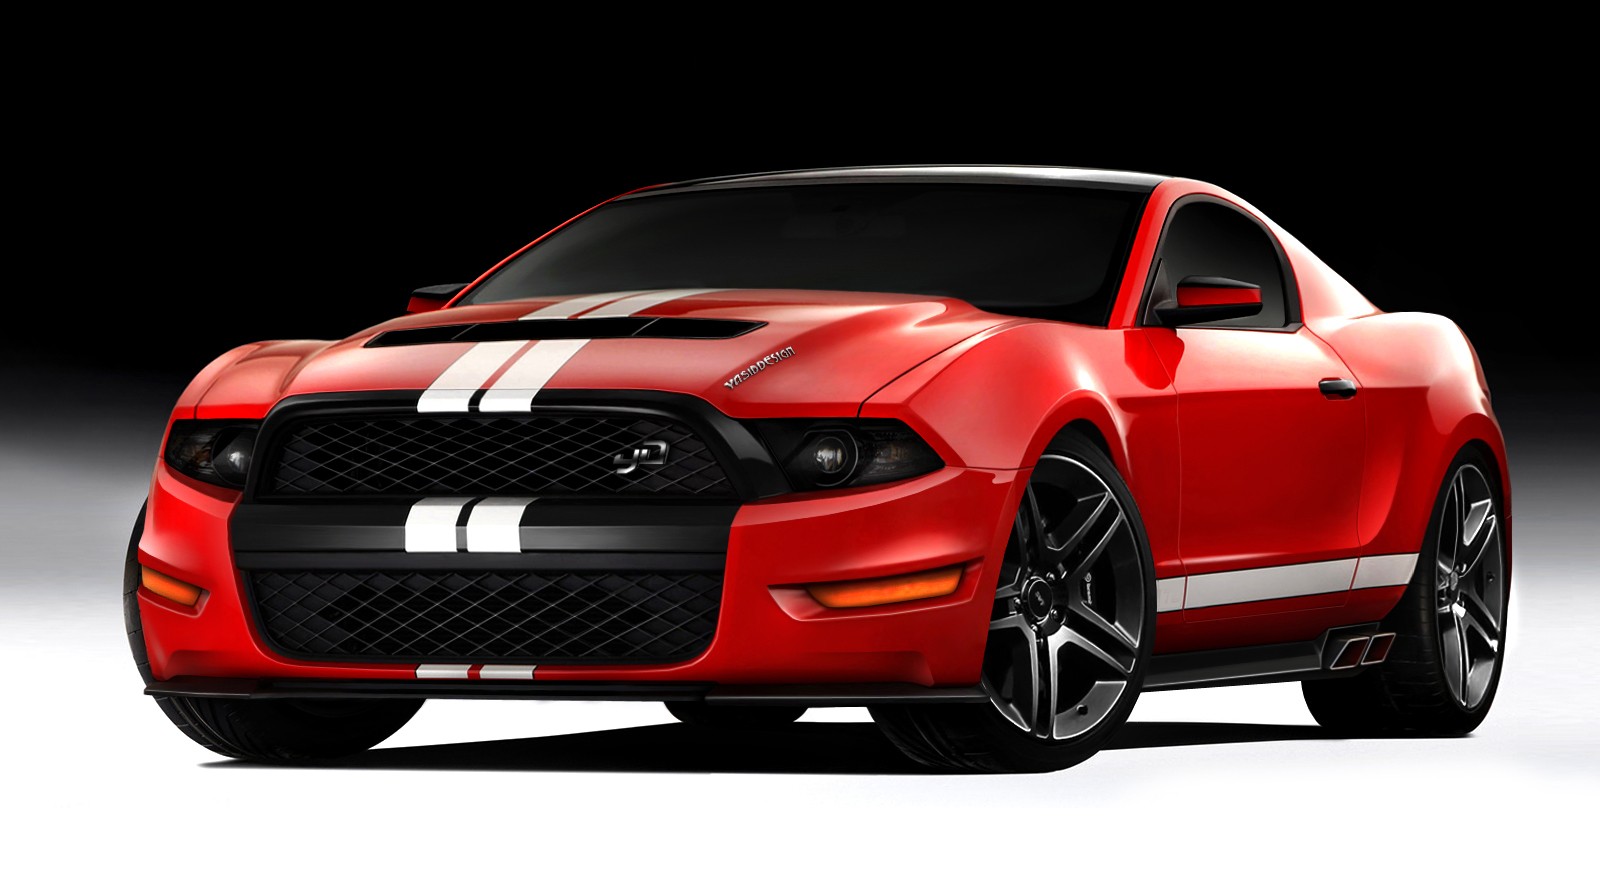 Ford Mustang Car Images Free Download